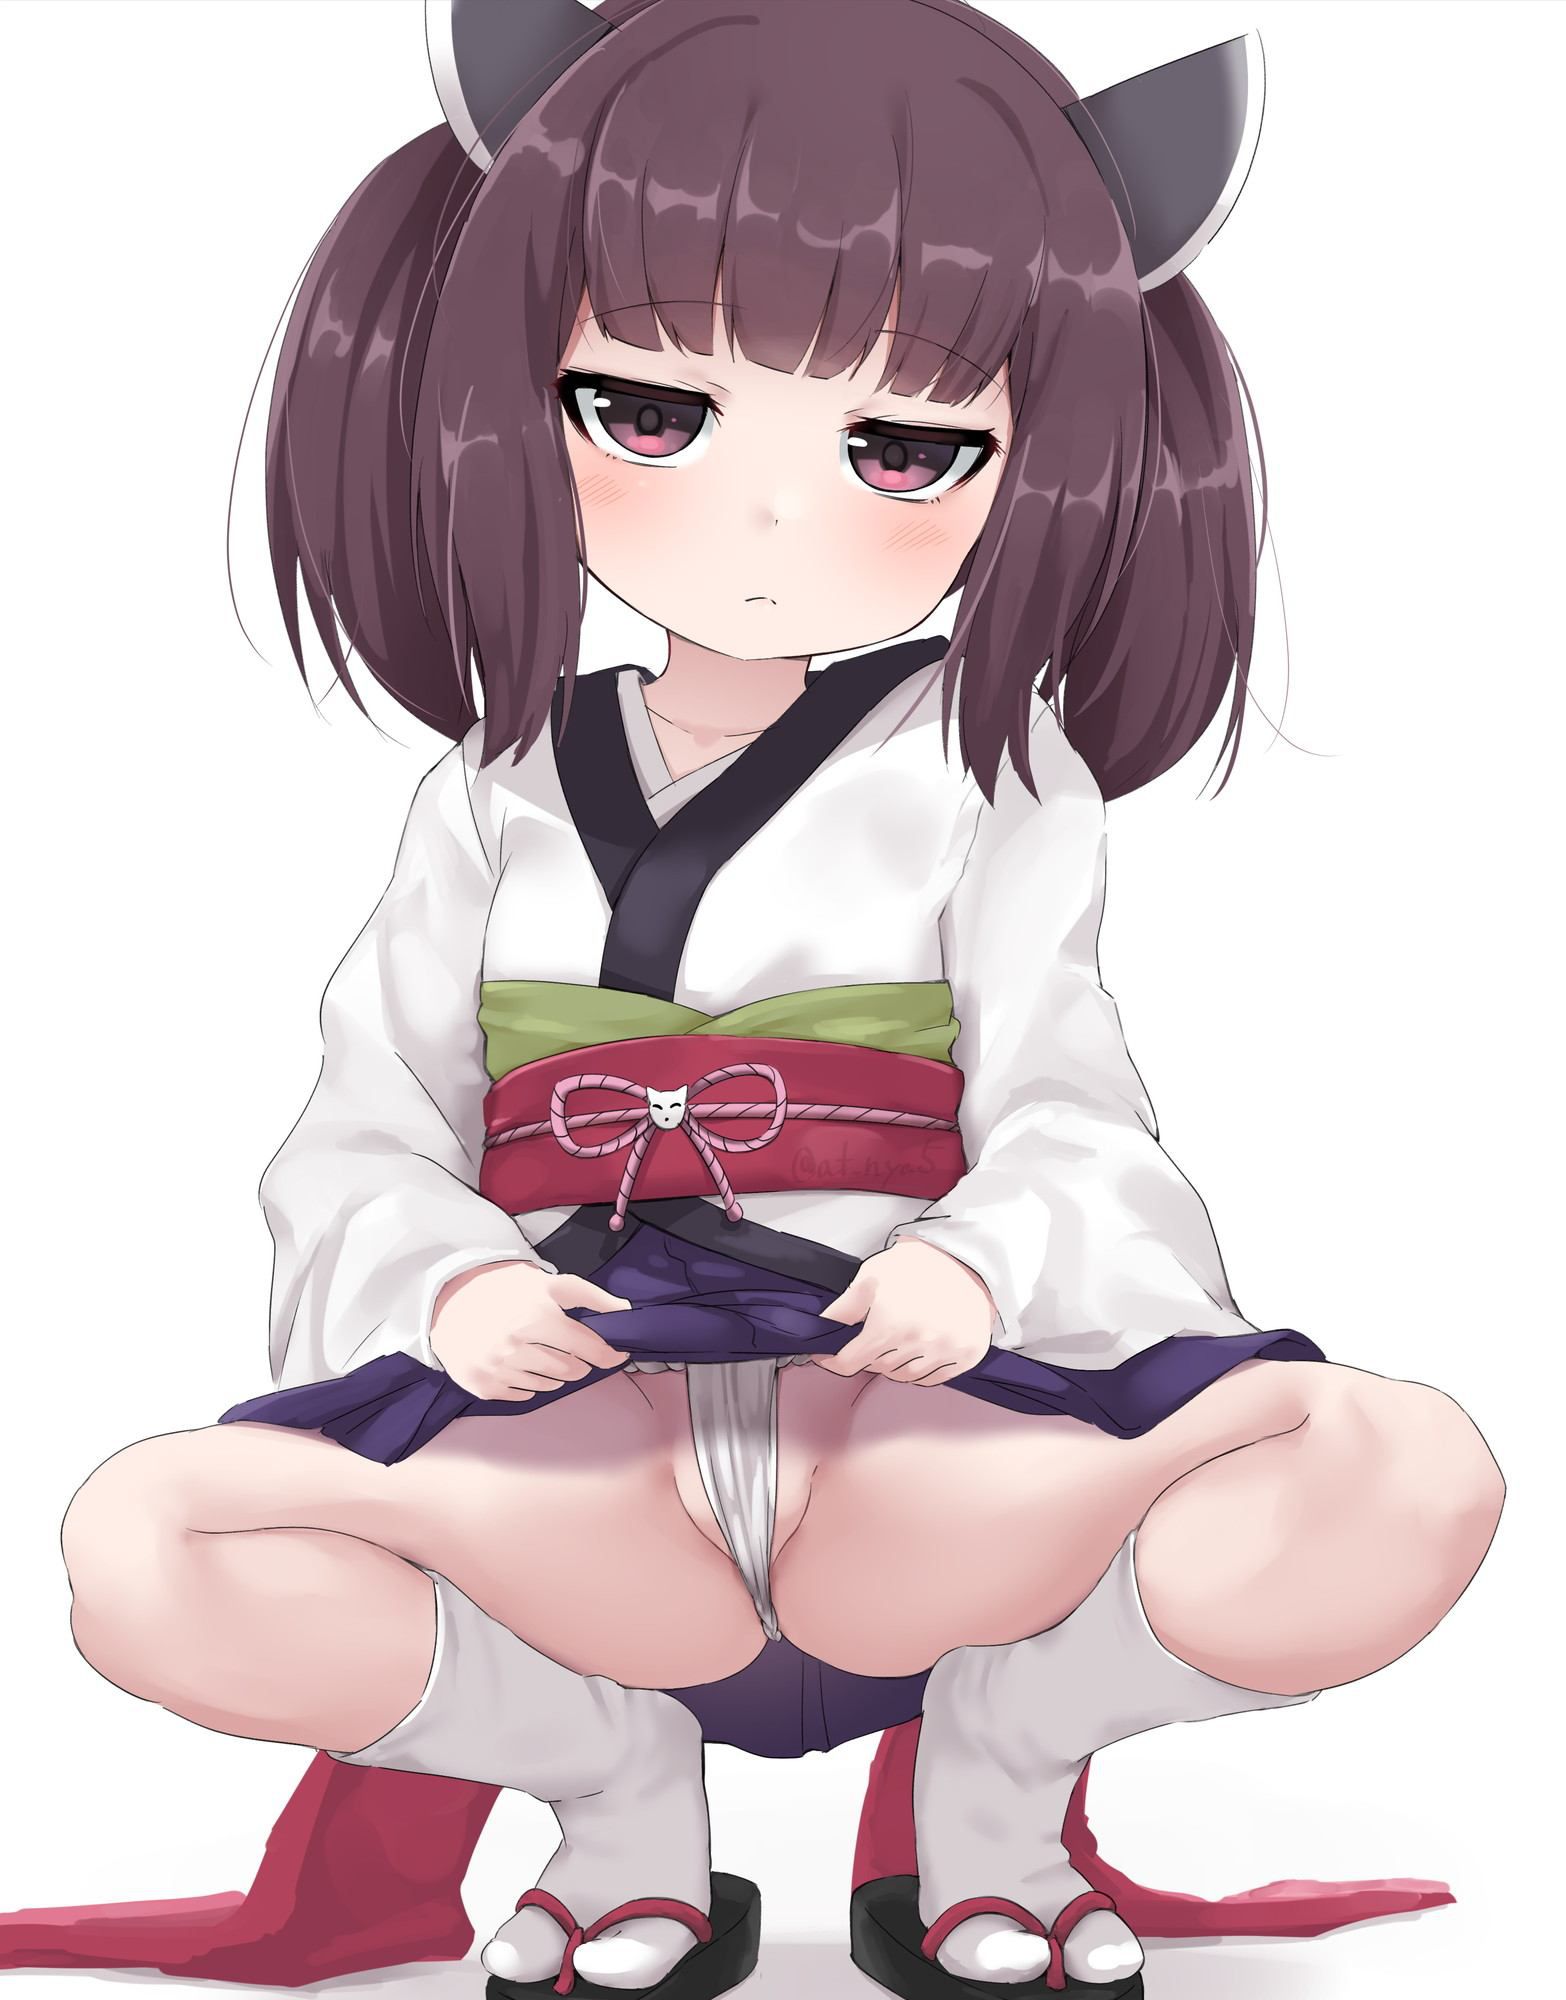 "Where are you looking~?" A soft-looking defenseless crotch image ♪ of a girl squatting with her eyes 35